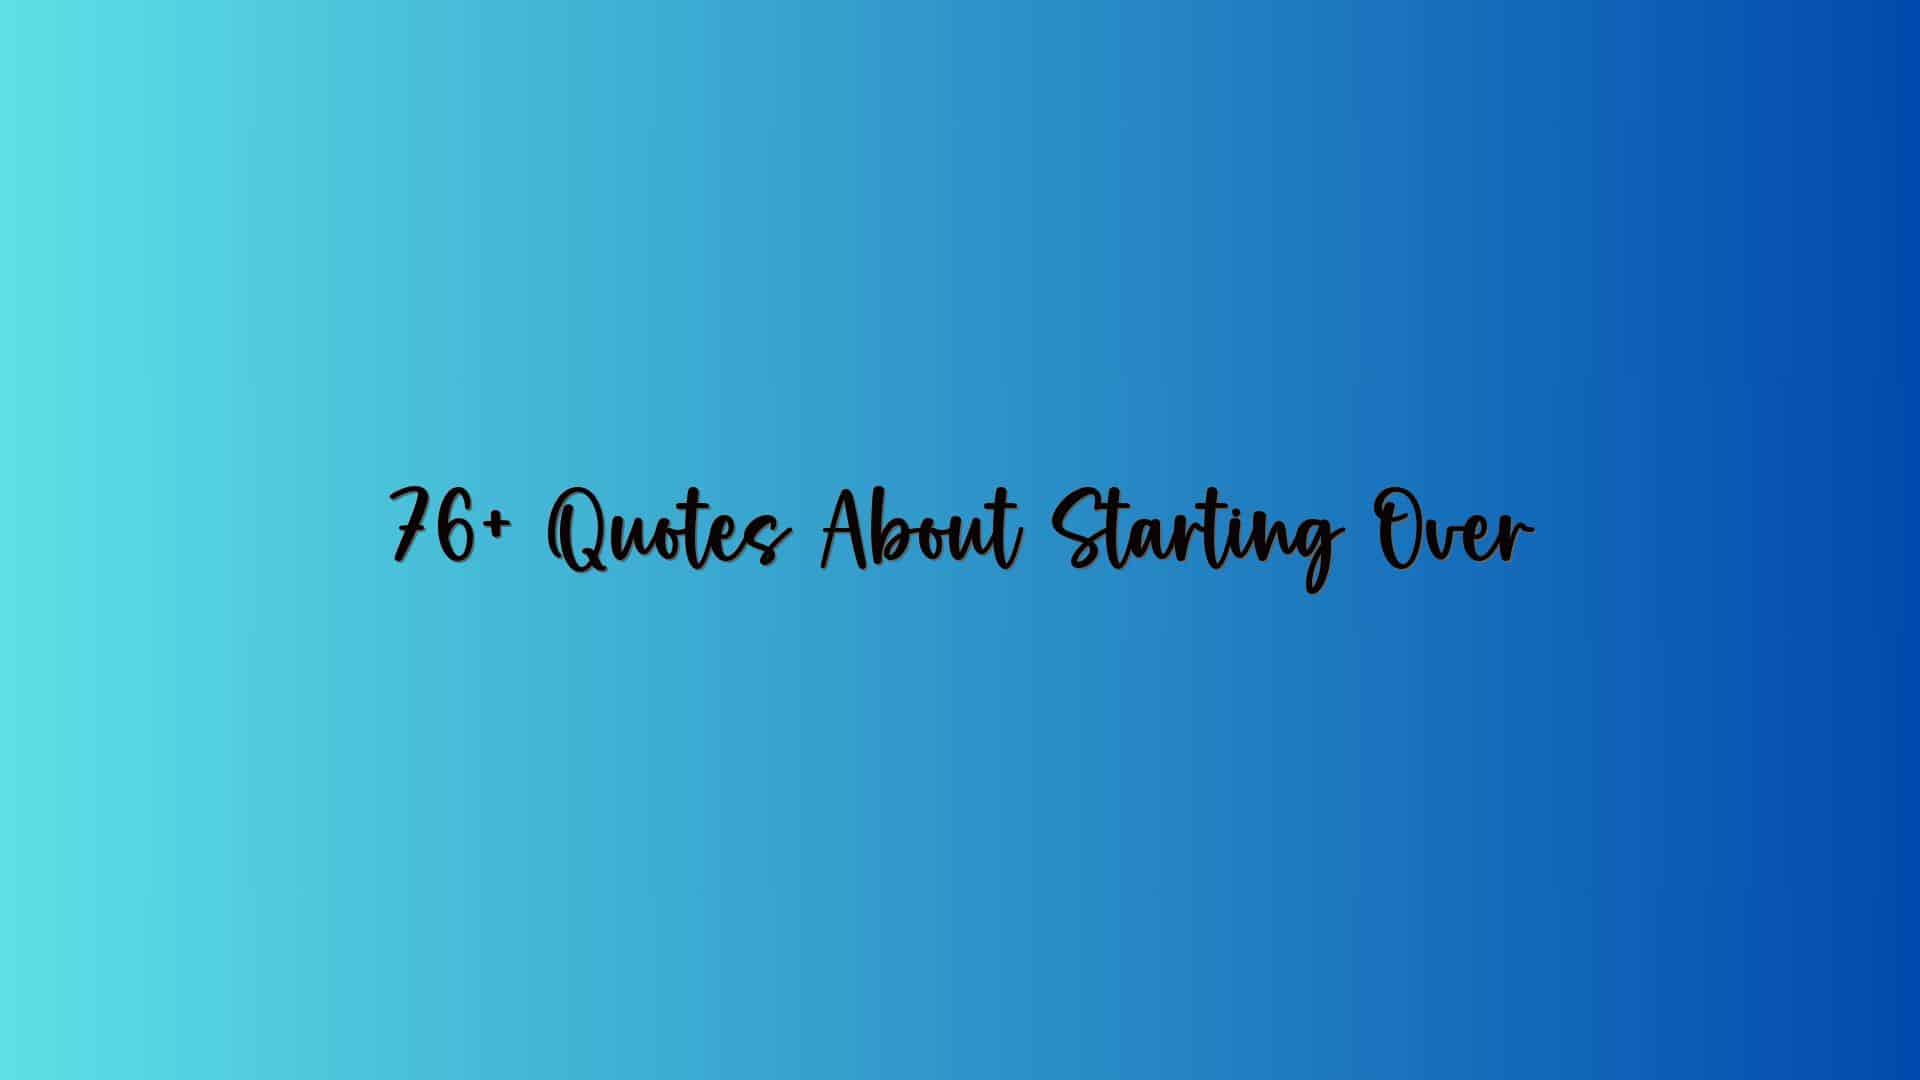 76+ Quotes About Starting Over